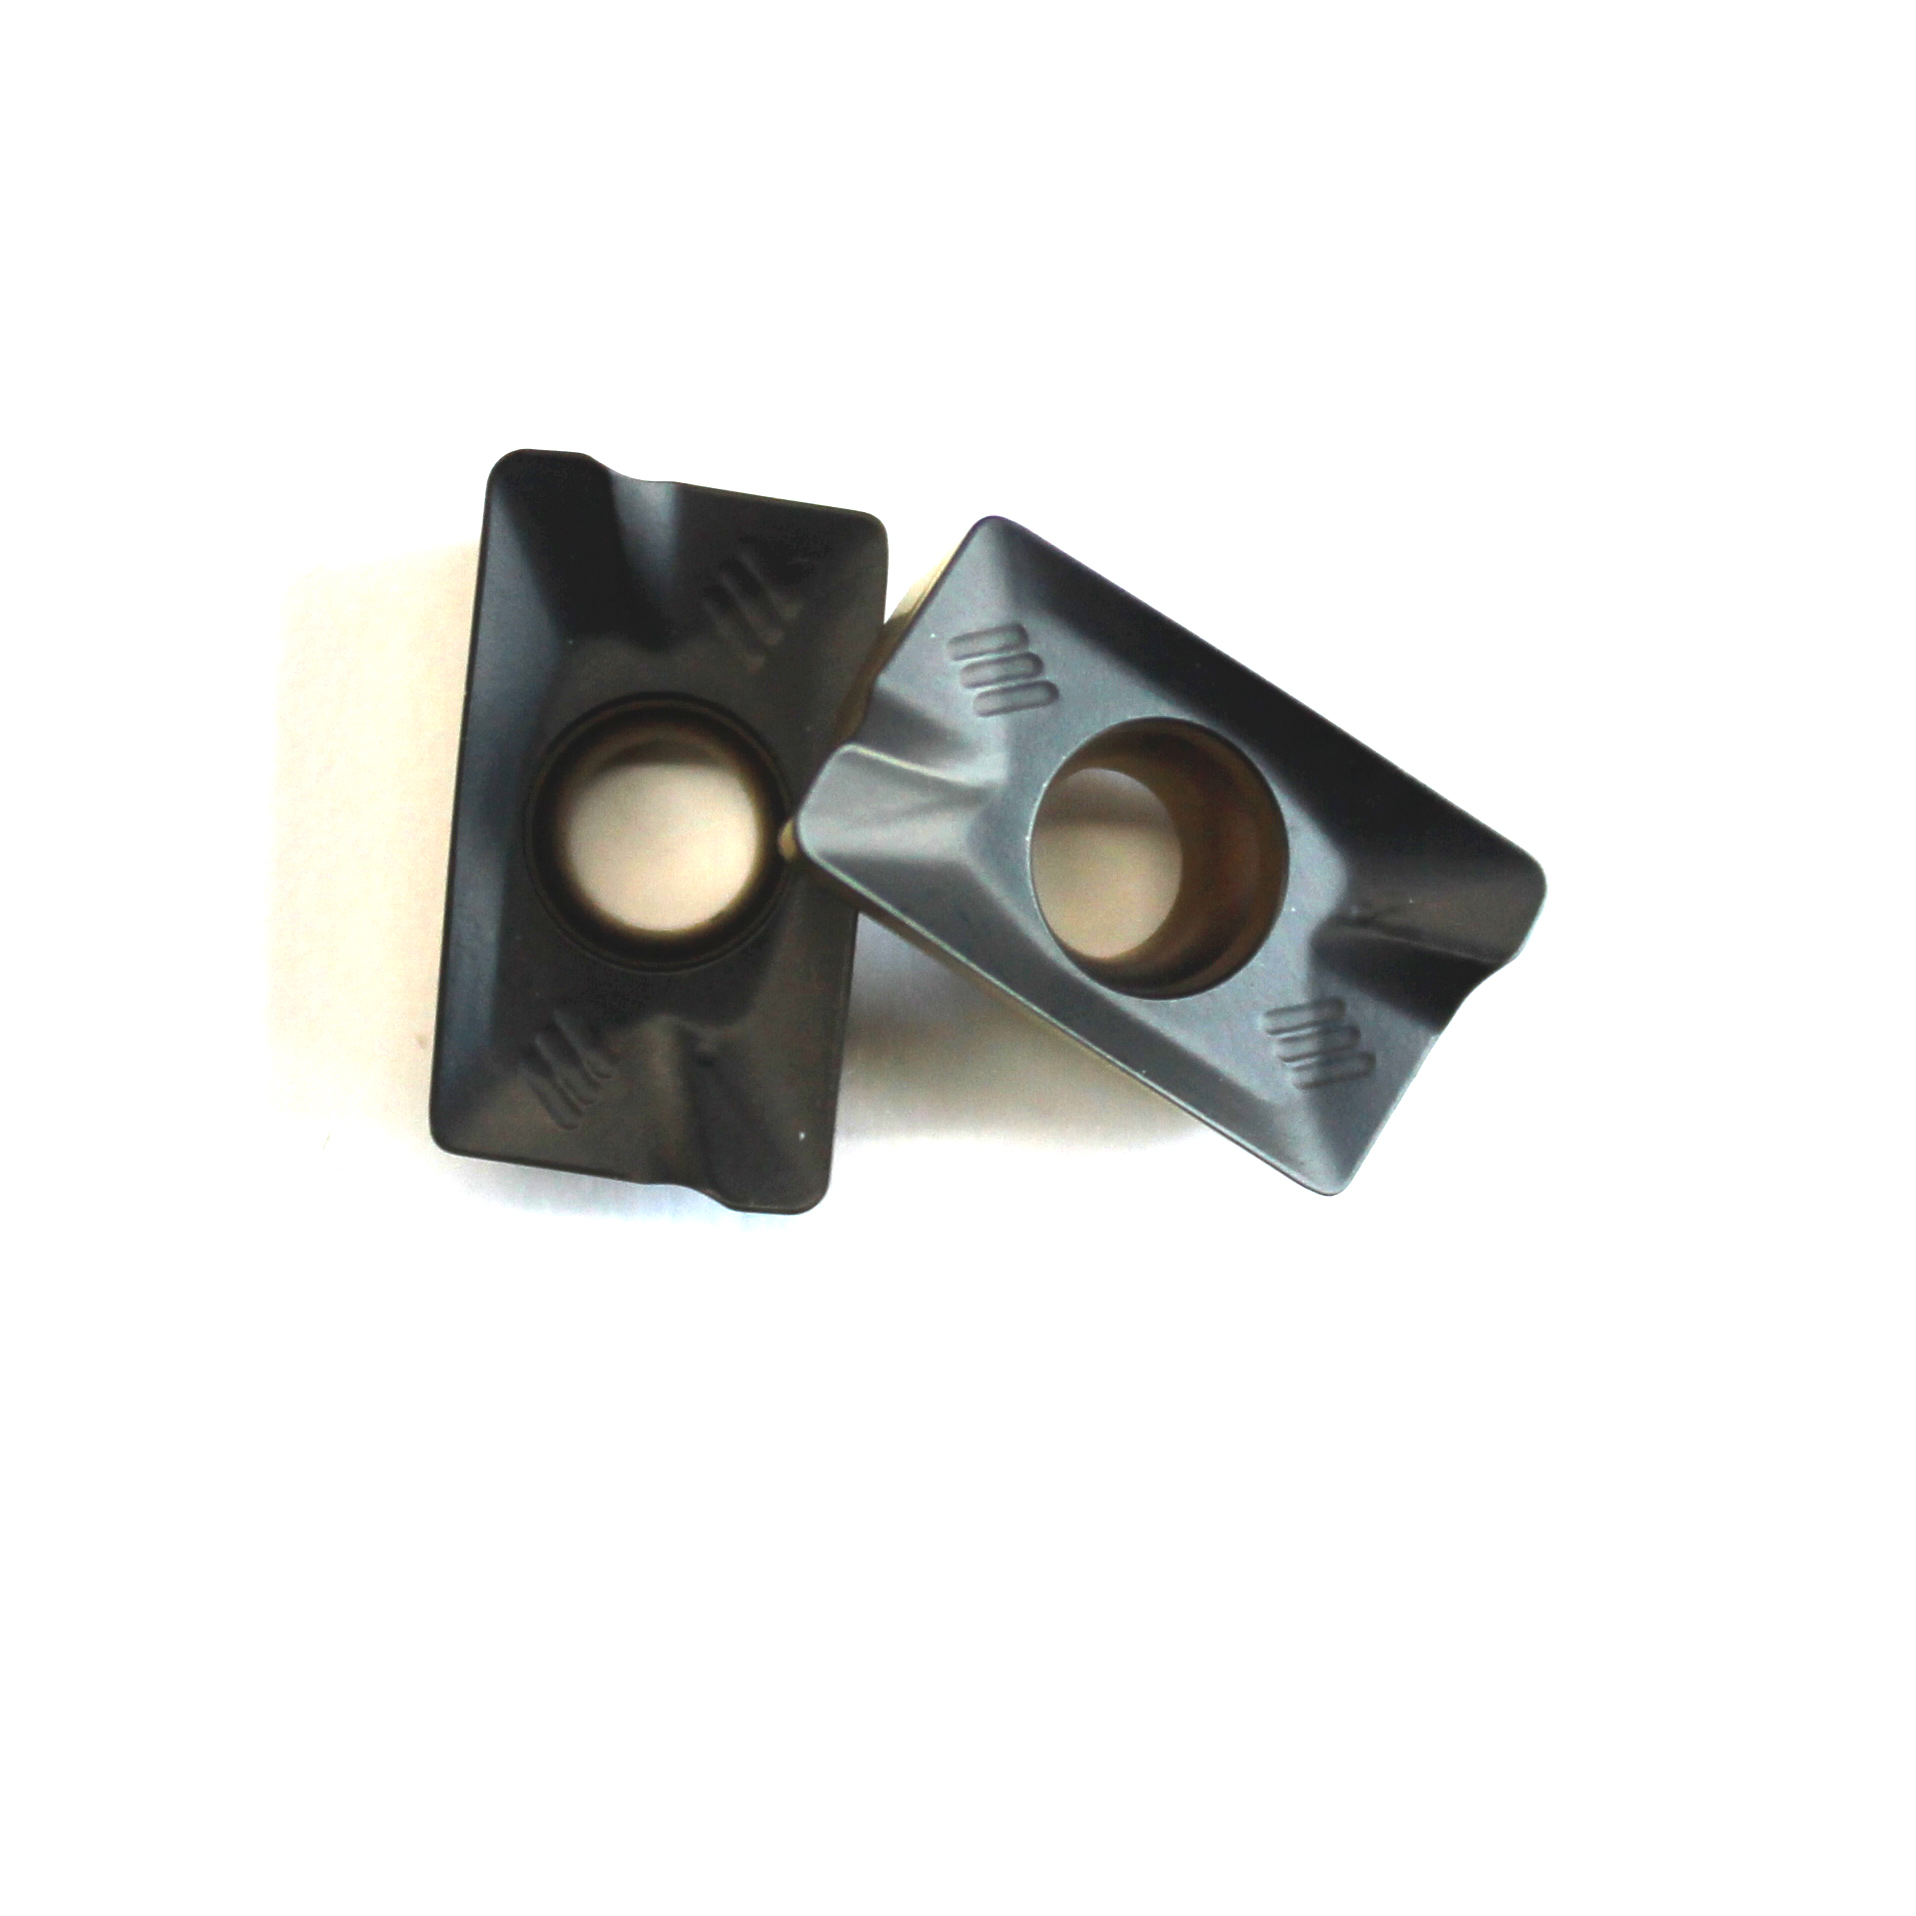 APKT 1604 indexable cnc carbide mould milling turning insert in stock with cheaper lower price